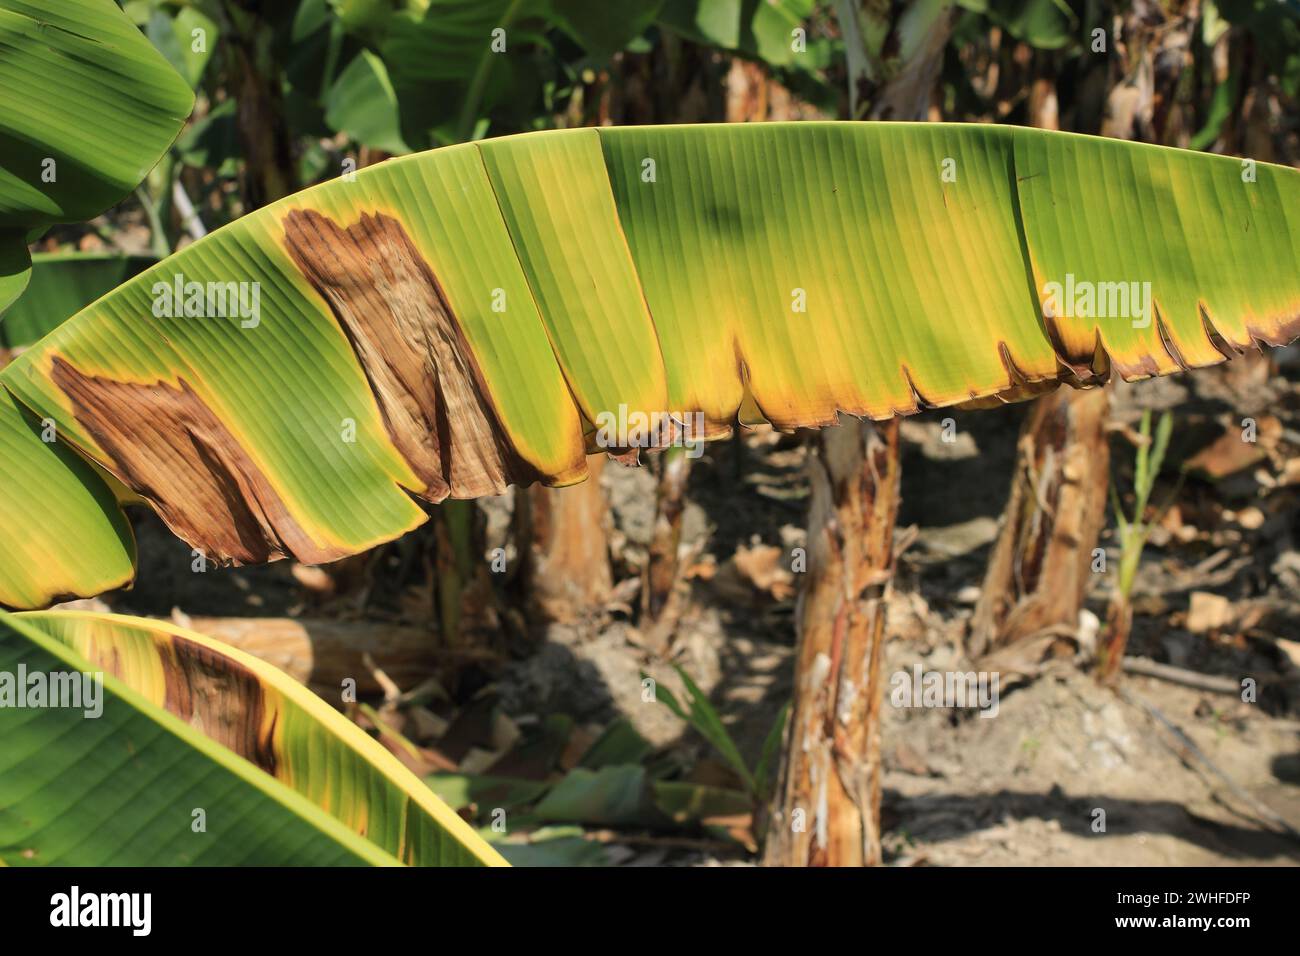 Selective focus of a banana plant affected by deadly Fusarium wilt disease Tropical Race 4 fungus  Stock Photo